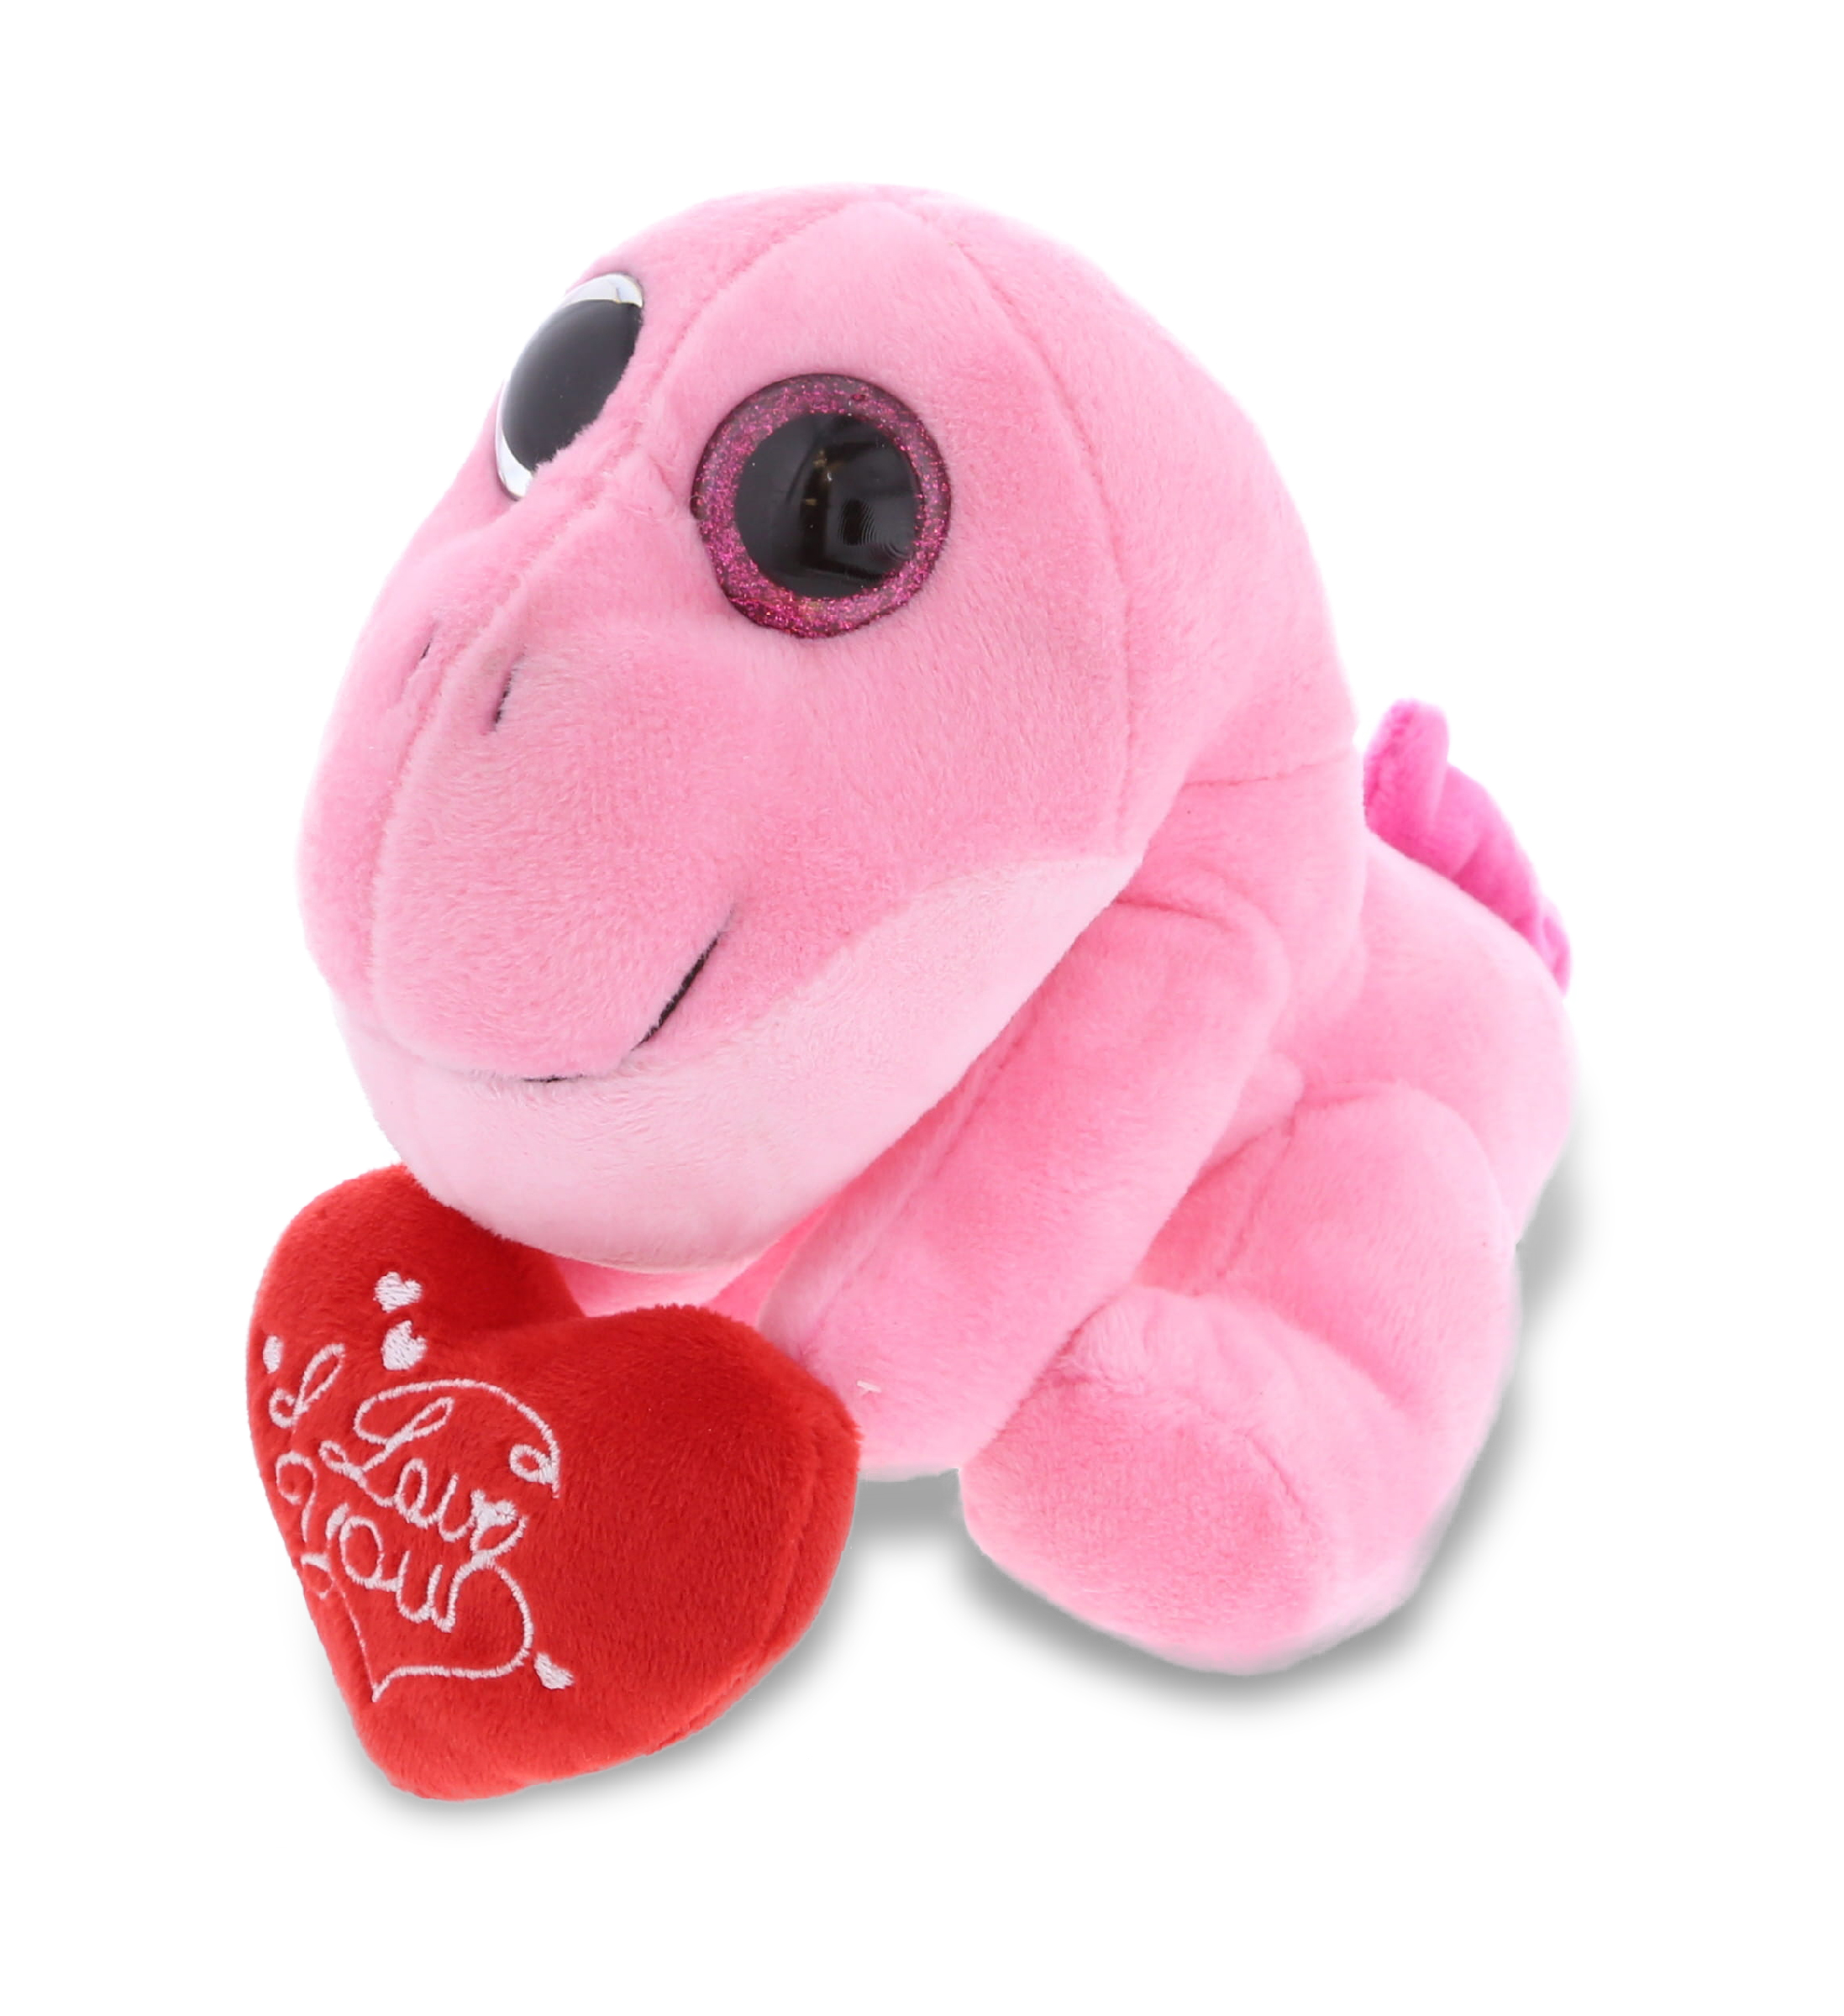 6″ – Dollibu I Love You Plush Sparkling Big Eye Pink T-Rex Dinosaur Stuffed  Toy With Heart & With Name Personalization For Valentine, Anniversary,  Romantic Date, Boyfriend, Or Girlfriend Gift - DolliBu